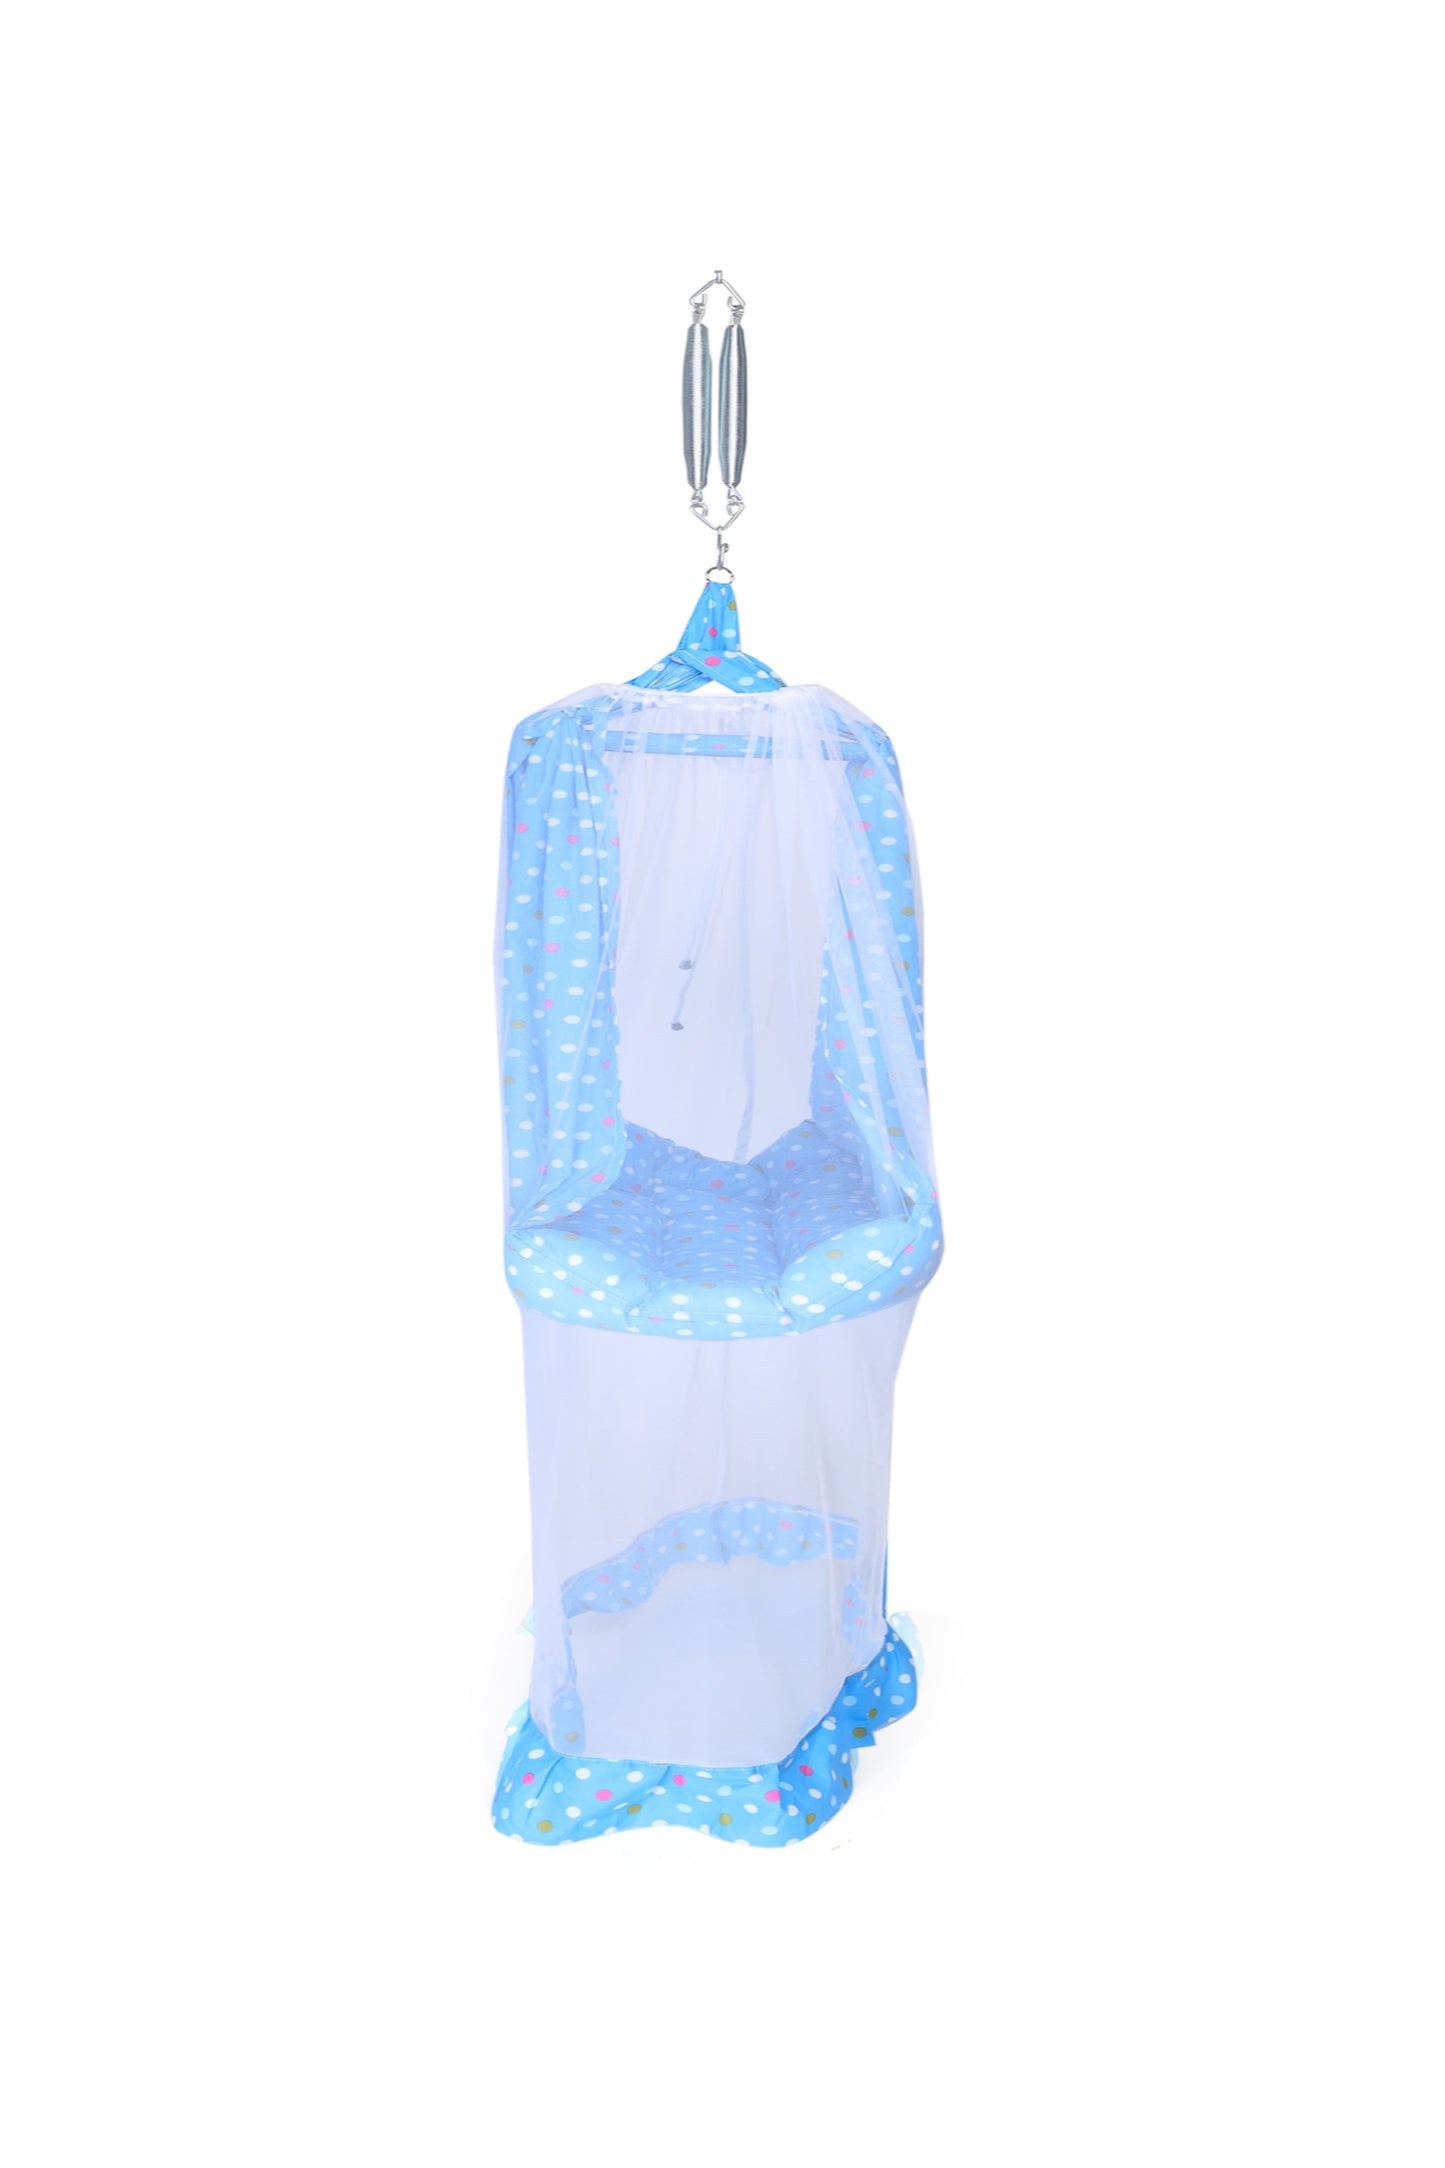 VParents Tot Baby Swing Cradle with Mosquito net Spring